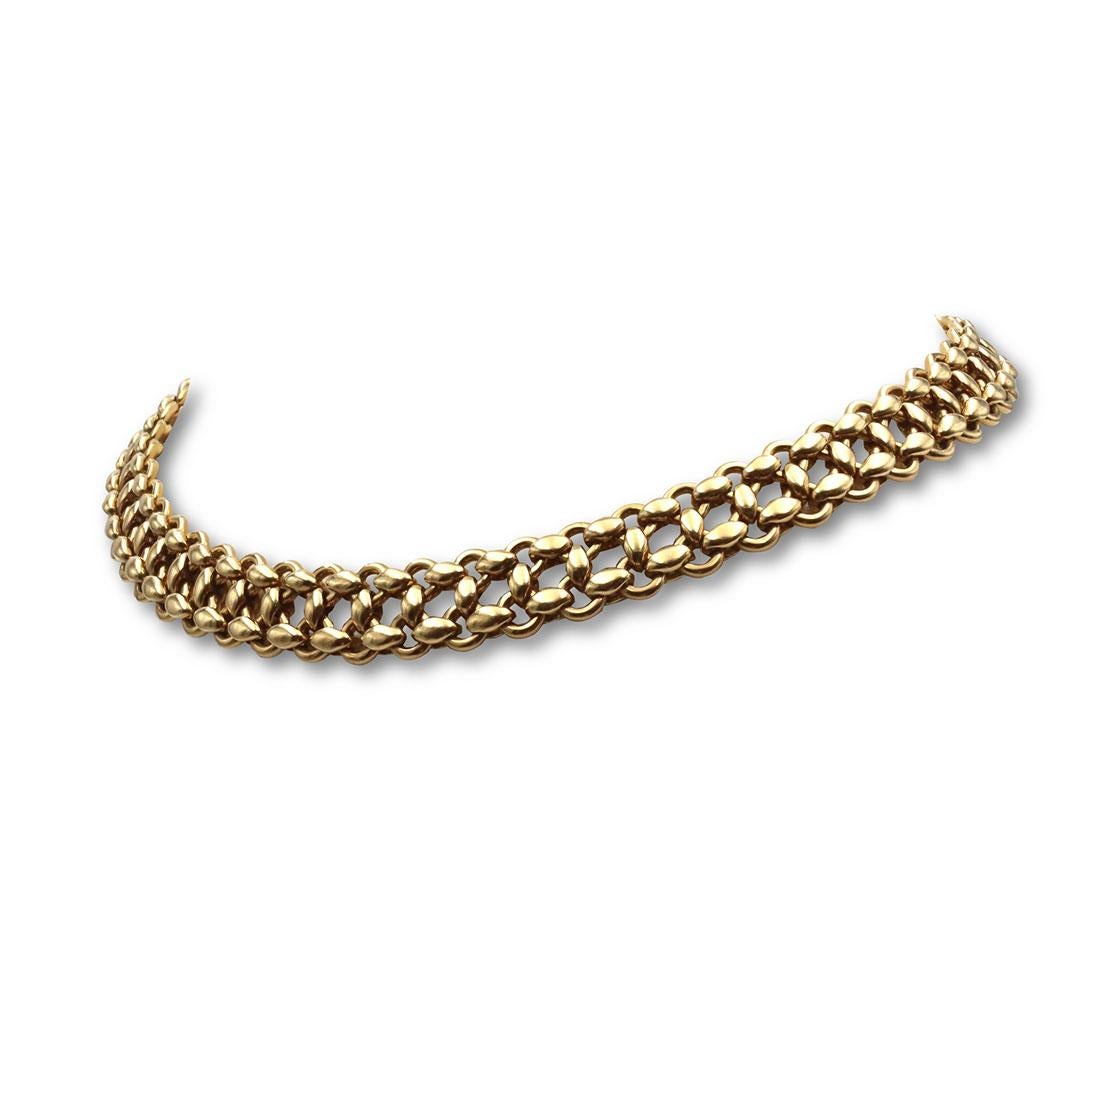 Authentic 'Inti' Hermès flexible necklace crafted in 18 karat yellow gold with two rows of links connected in an intricately woven pattern. The necklace measures 13 mm wide and 15 1/2 inches in length. Signed Hermes, 750, with serial number.  The